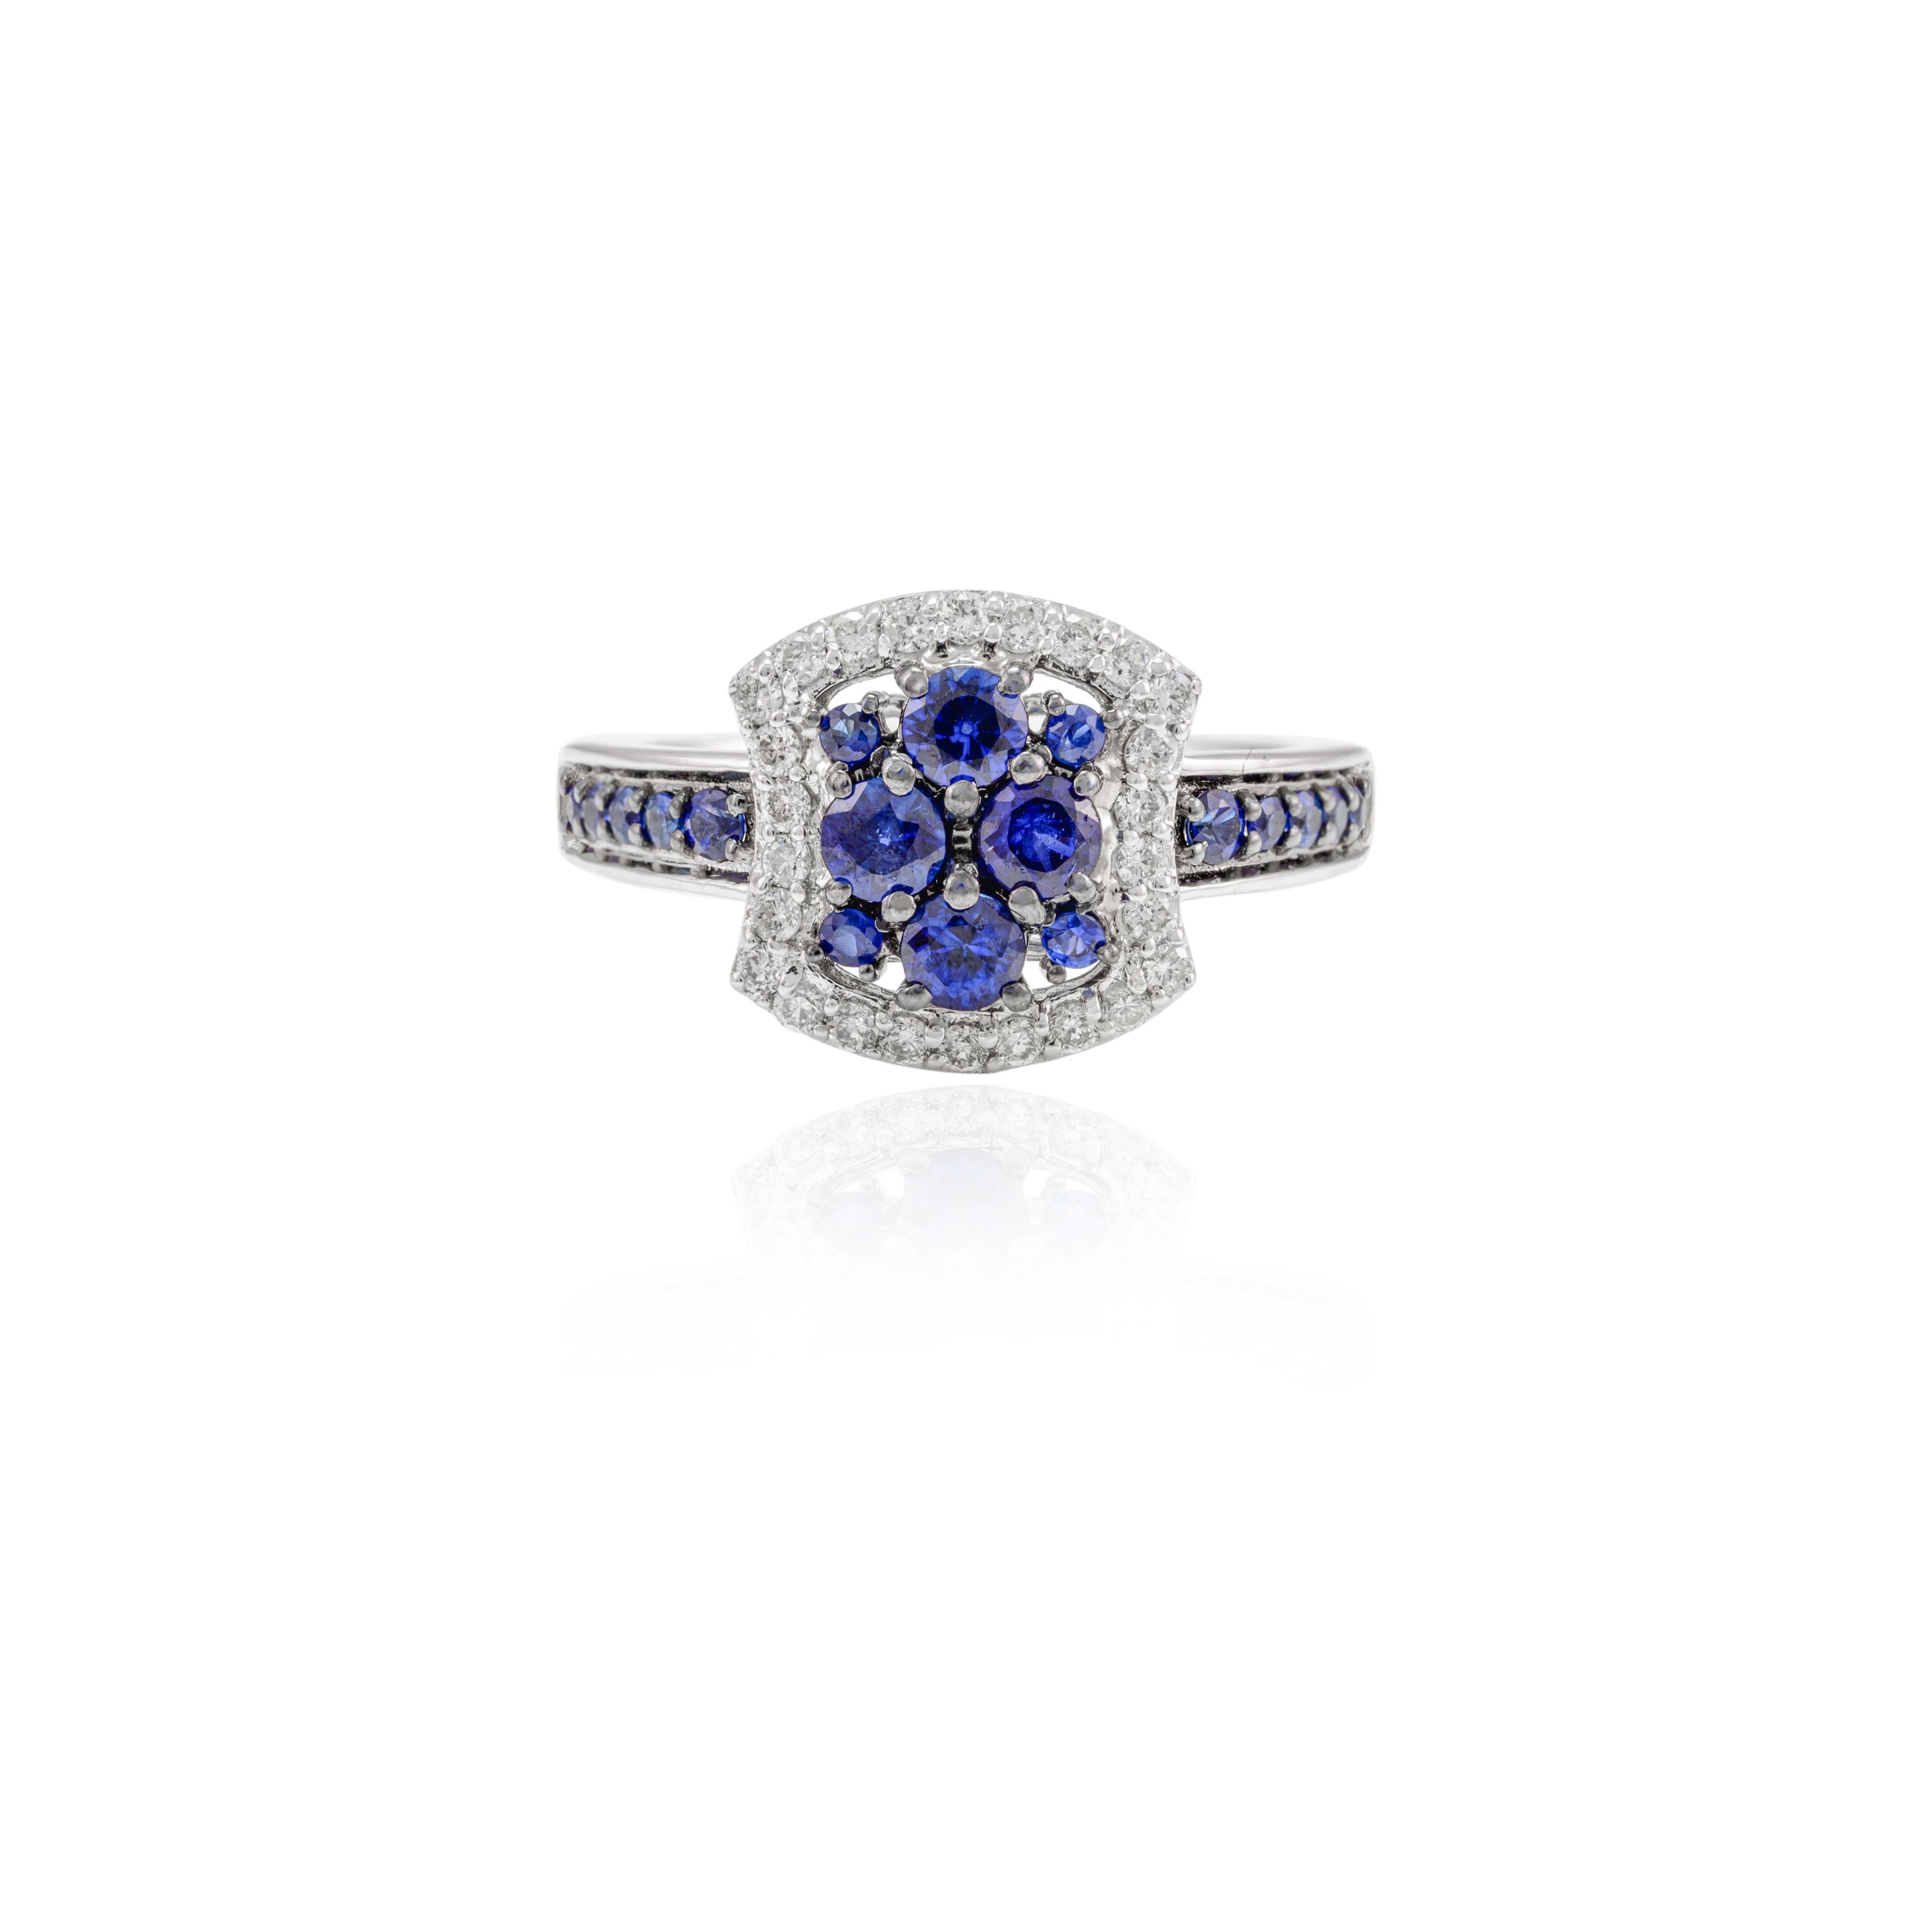 For Sale:  Antique Blue Sapphire and Diamond Engagement Ring in 14k Solid White Gold 4